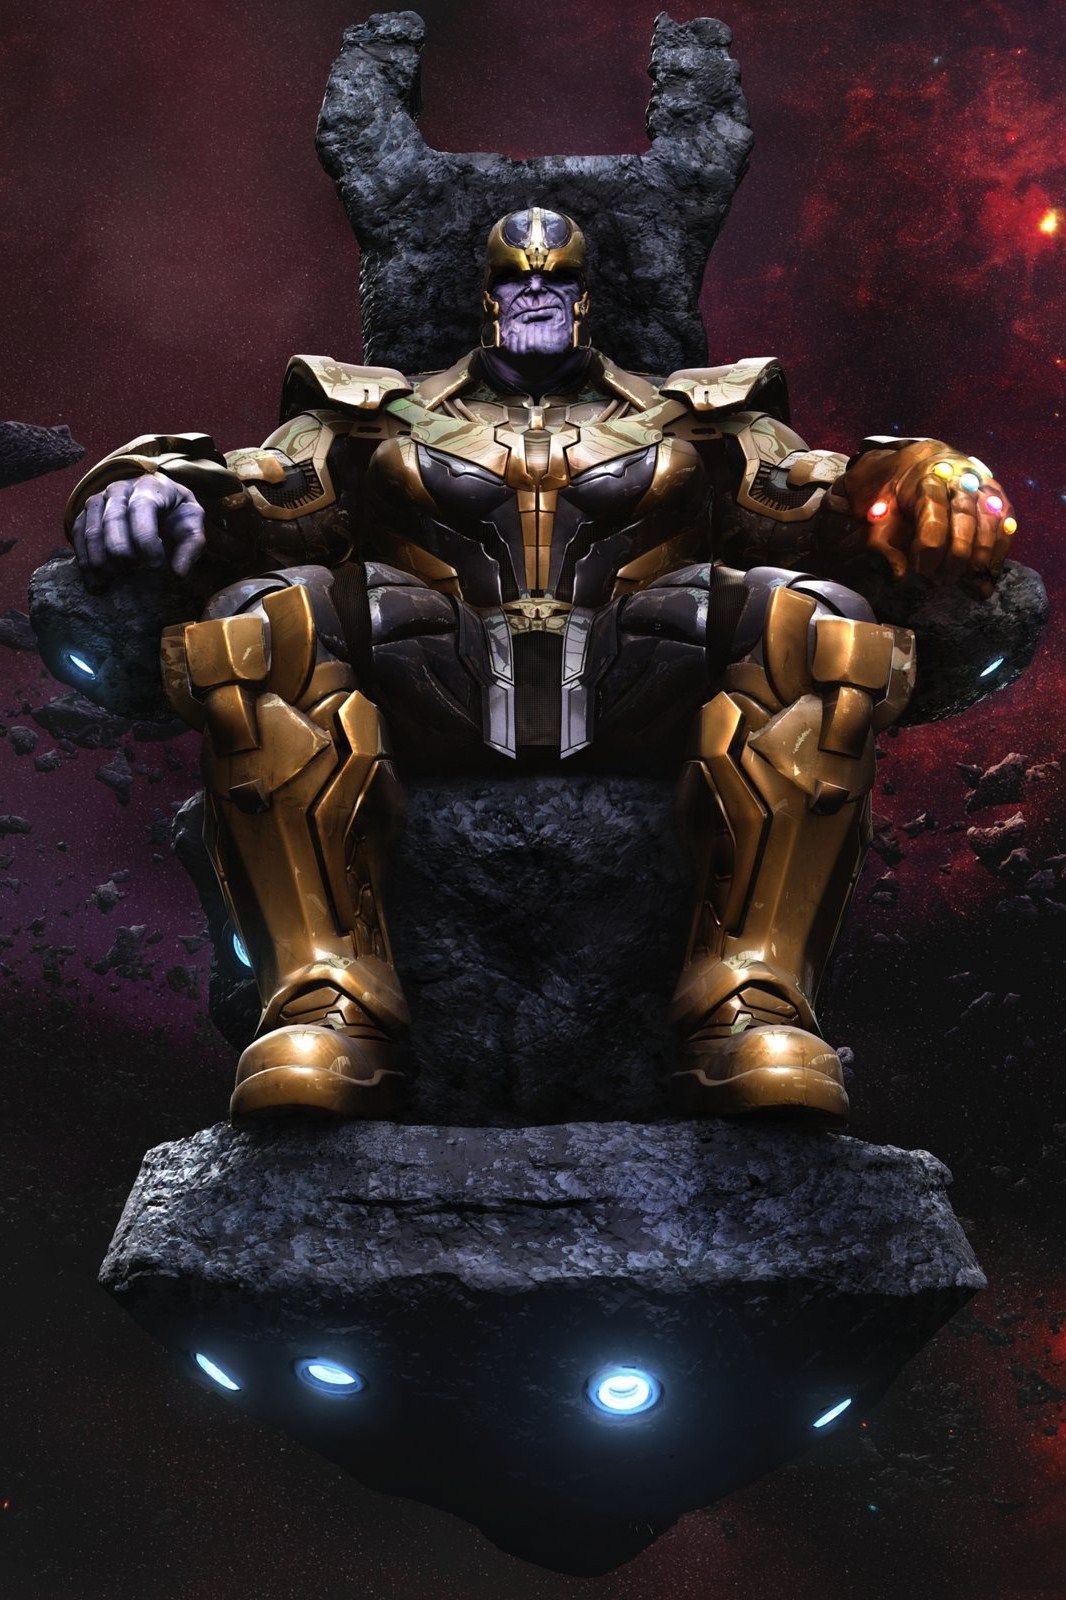 Is Thanos the hero that business needs?